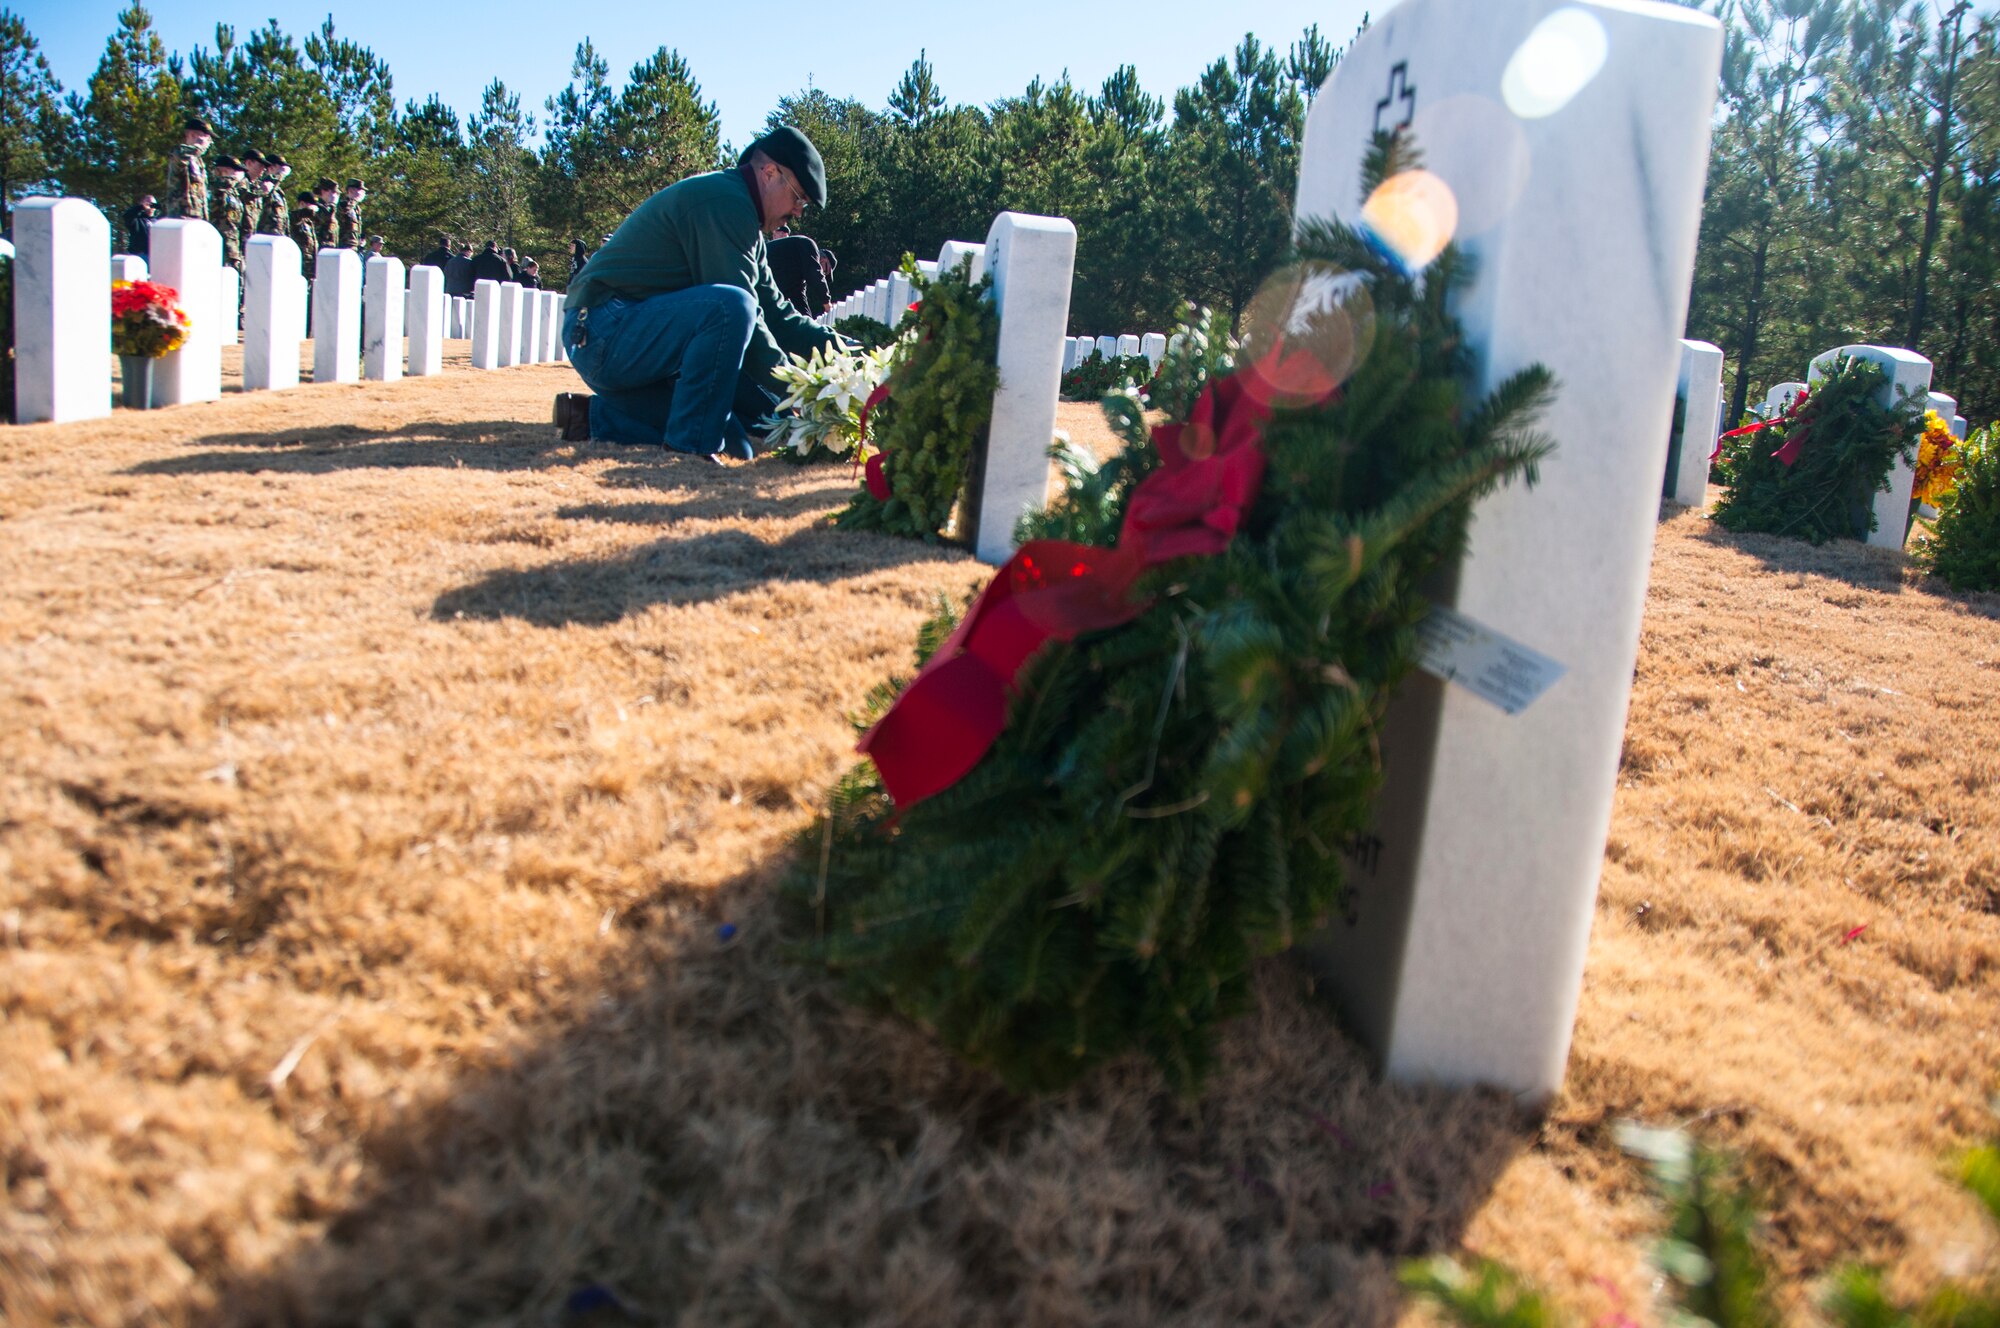 A volunteer lays a wreath on a gravestone for Wreaths Across America at Georgia National Cemetery in Canton, Ga. Dec. 13, 2014. Wreaths Across America occurs the second Saturday of December every year. (U.S. Air Force photo/Senior Airman Daniel Phelps)